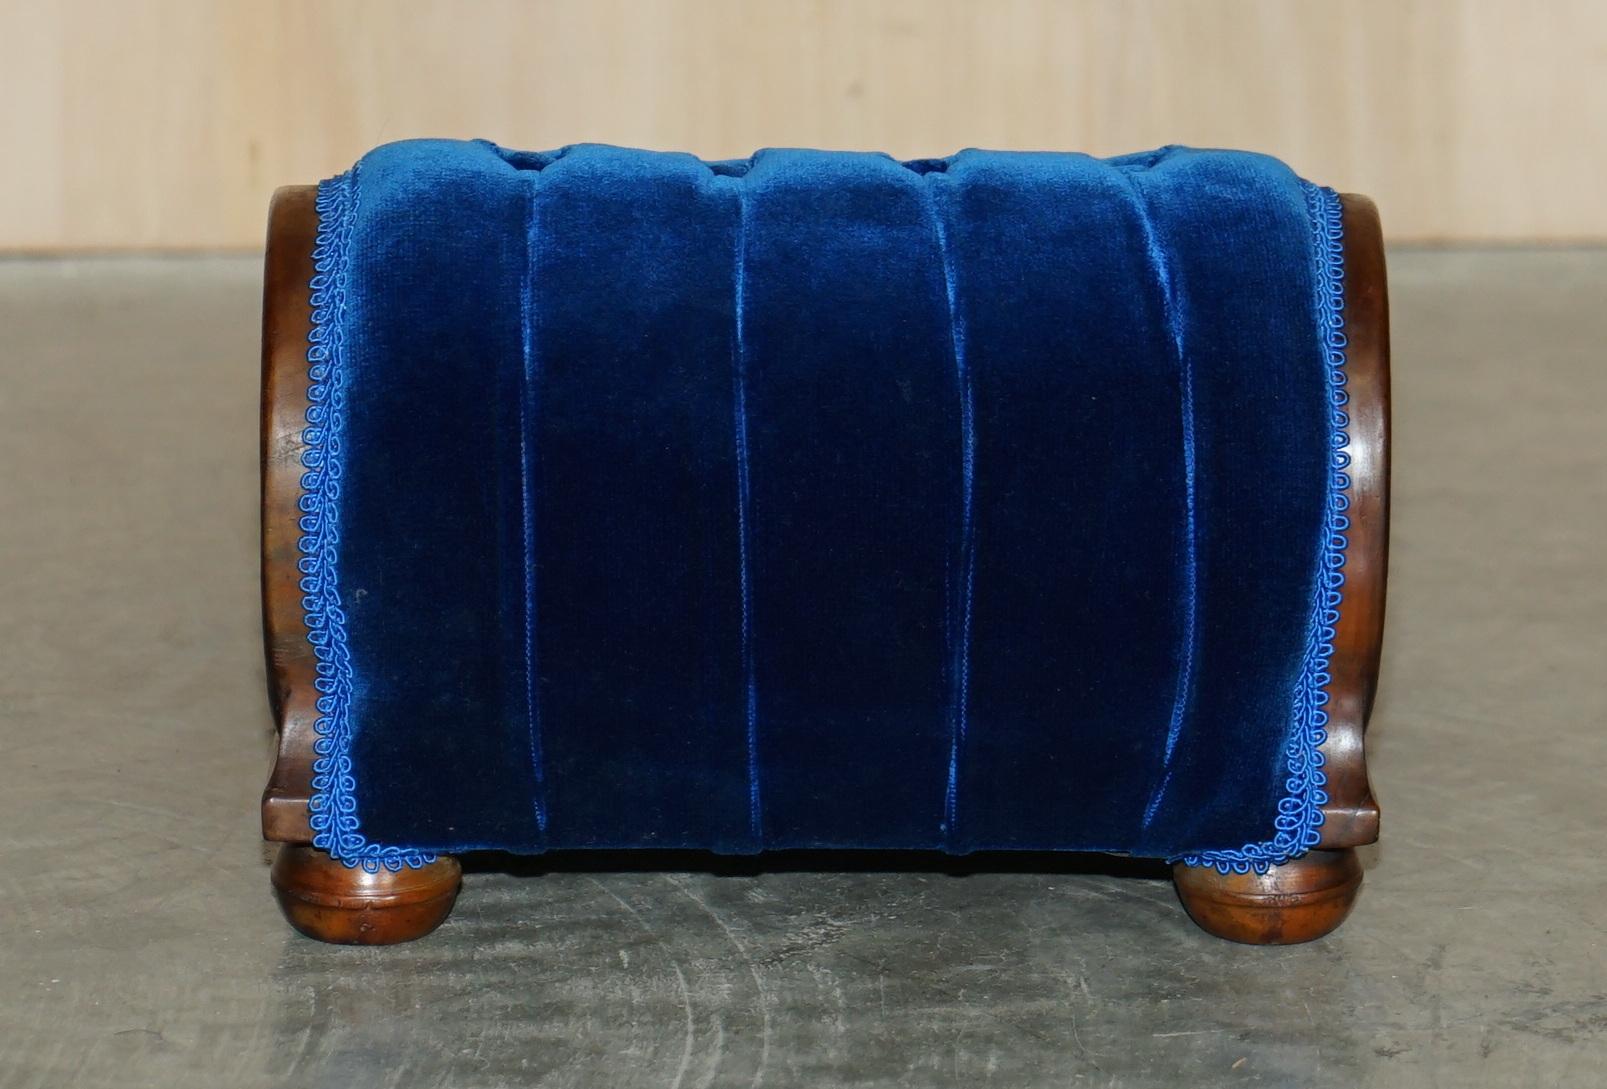 PAIR OF REGENCY BLUE ANTIQUE ViCTORIAN CHESTERFIELD TUFTED CURVED FOOTSTOOLS 13